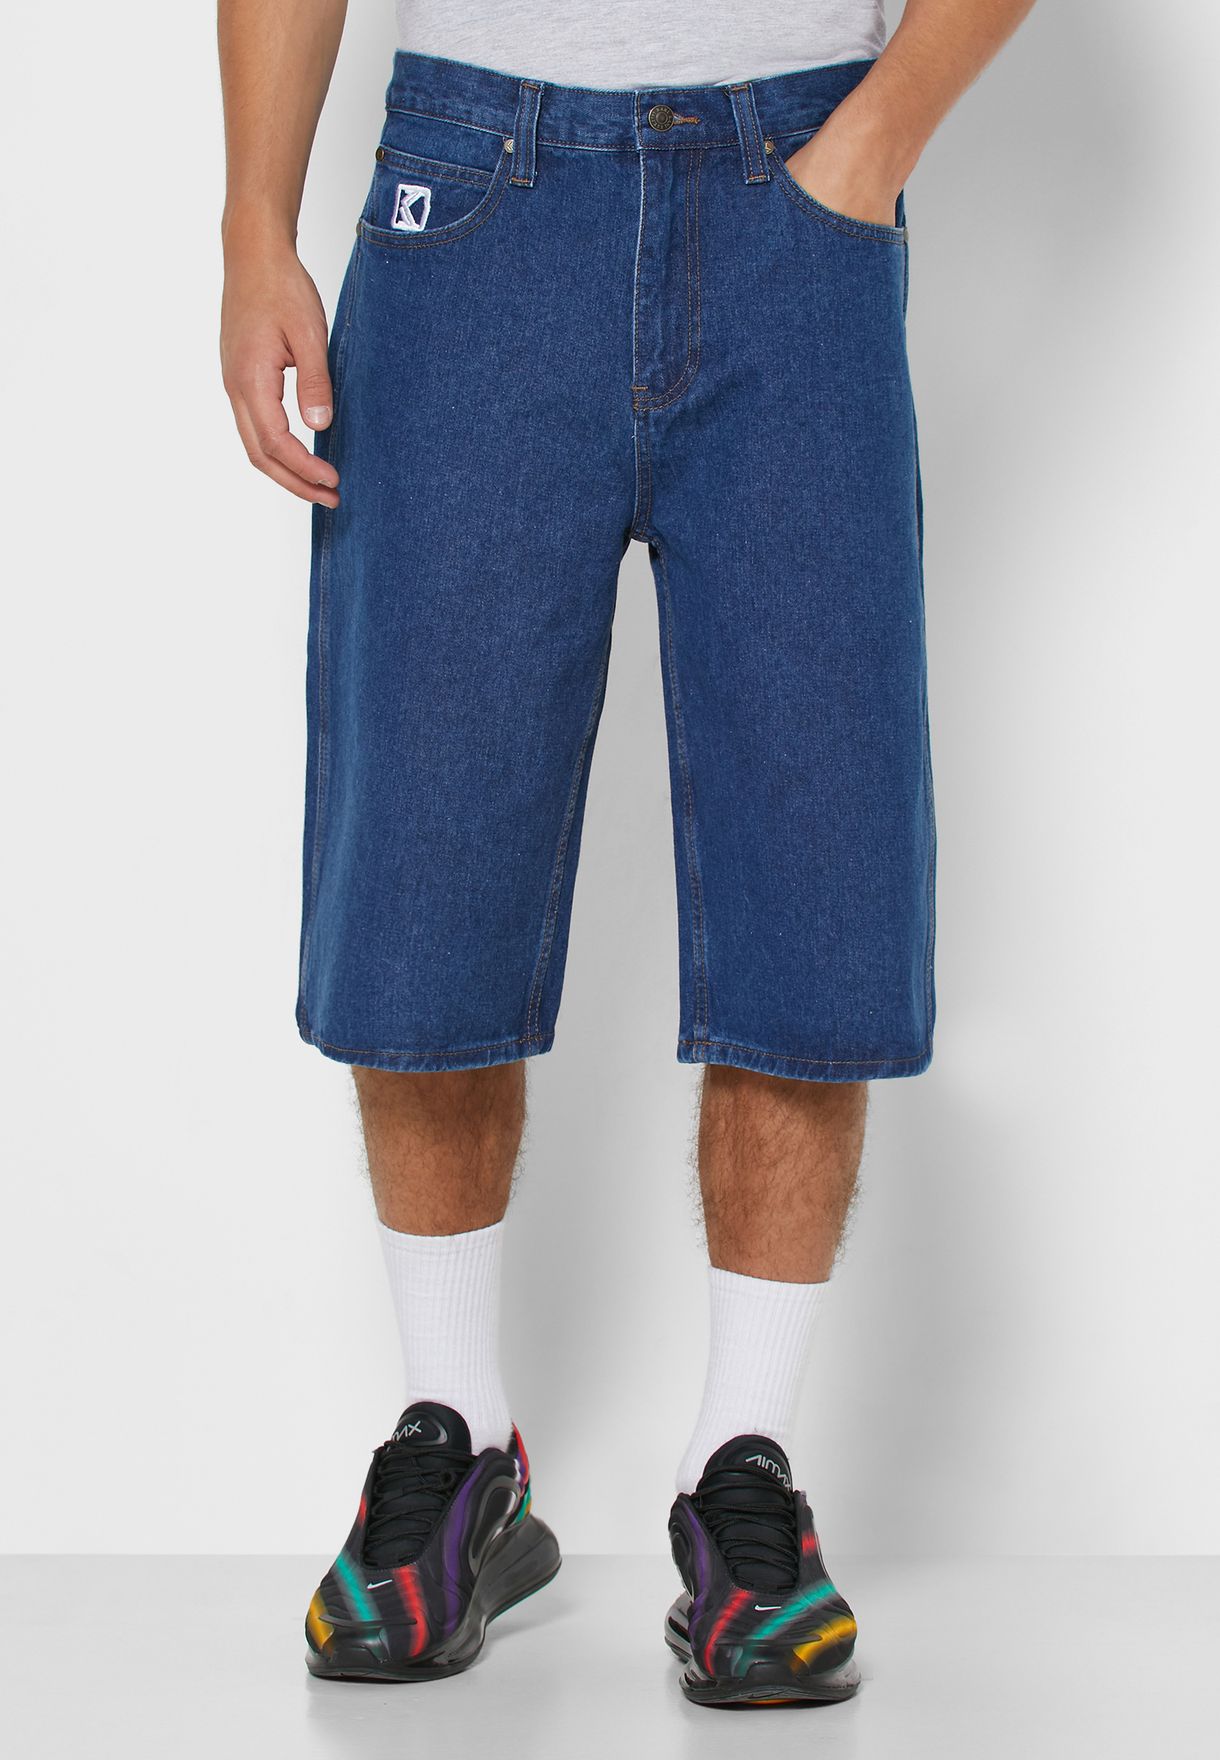 buy jeans shorts